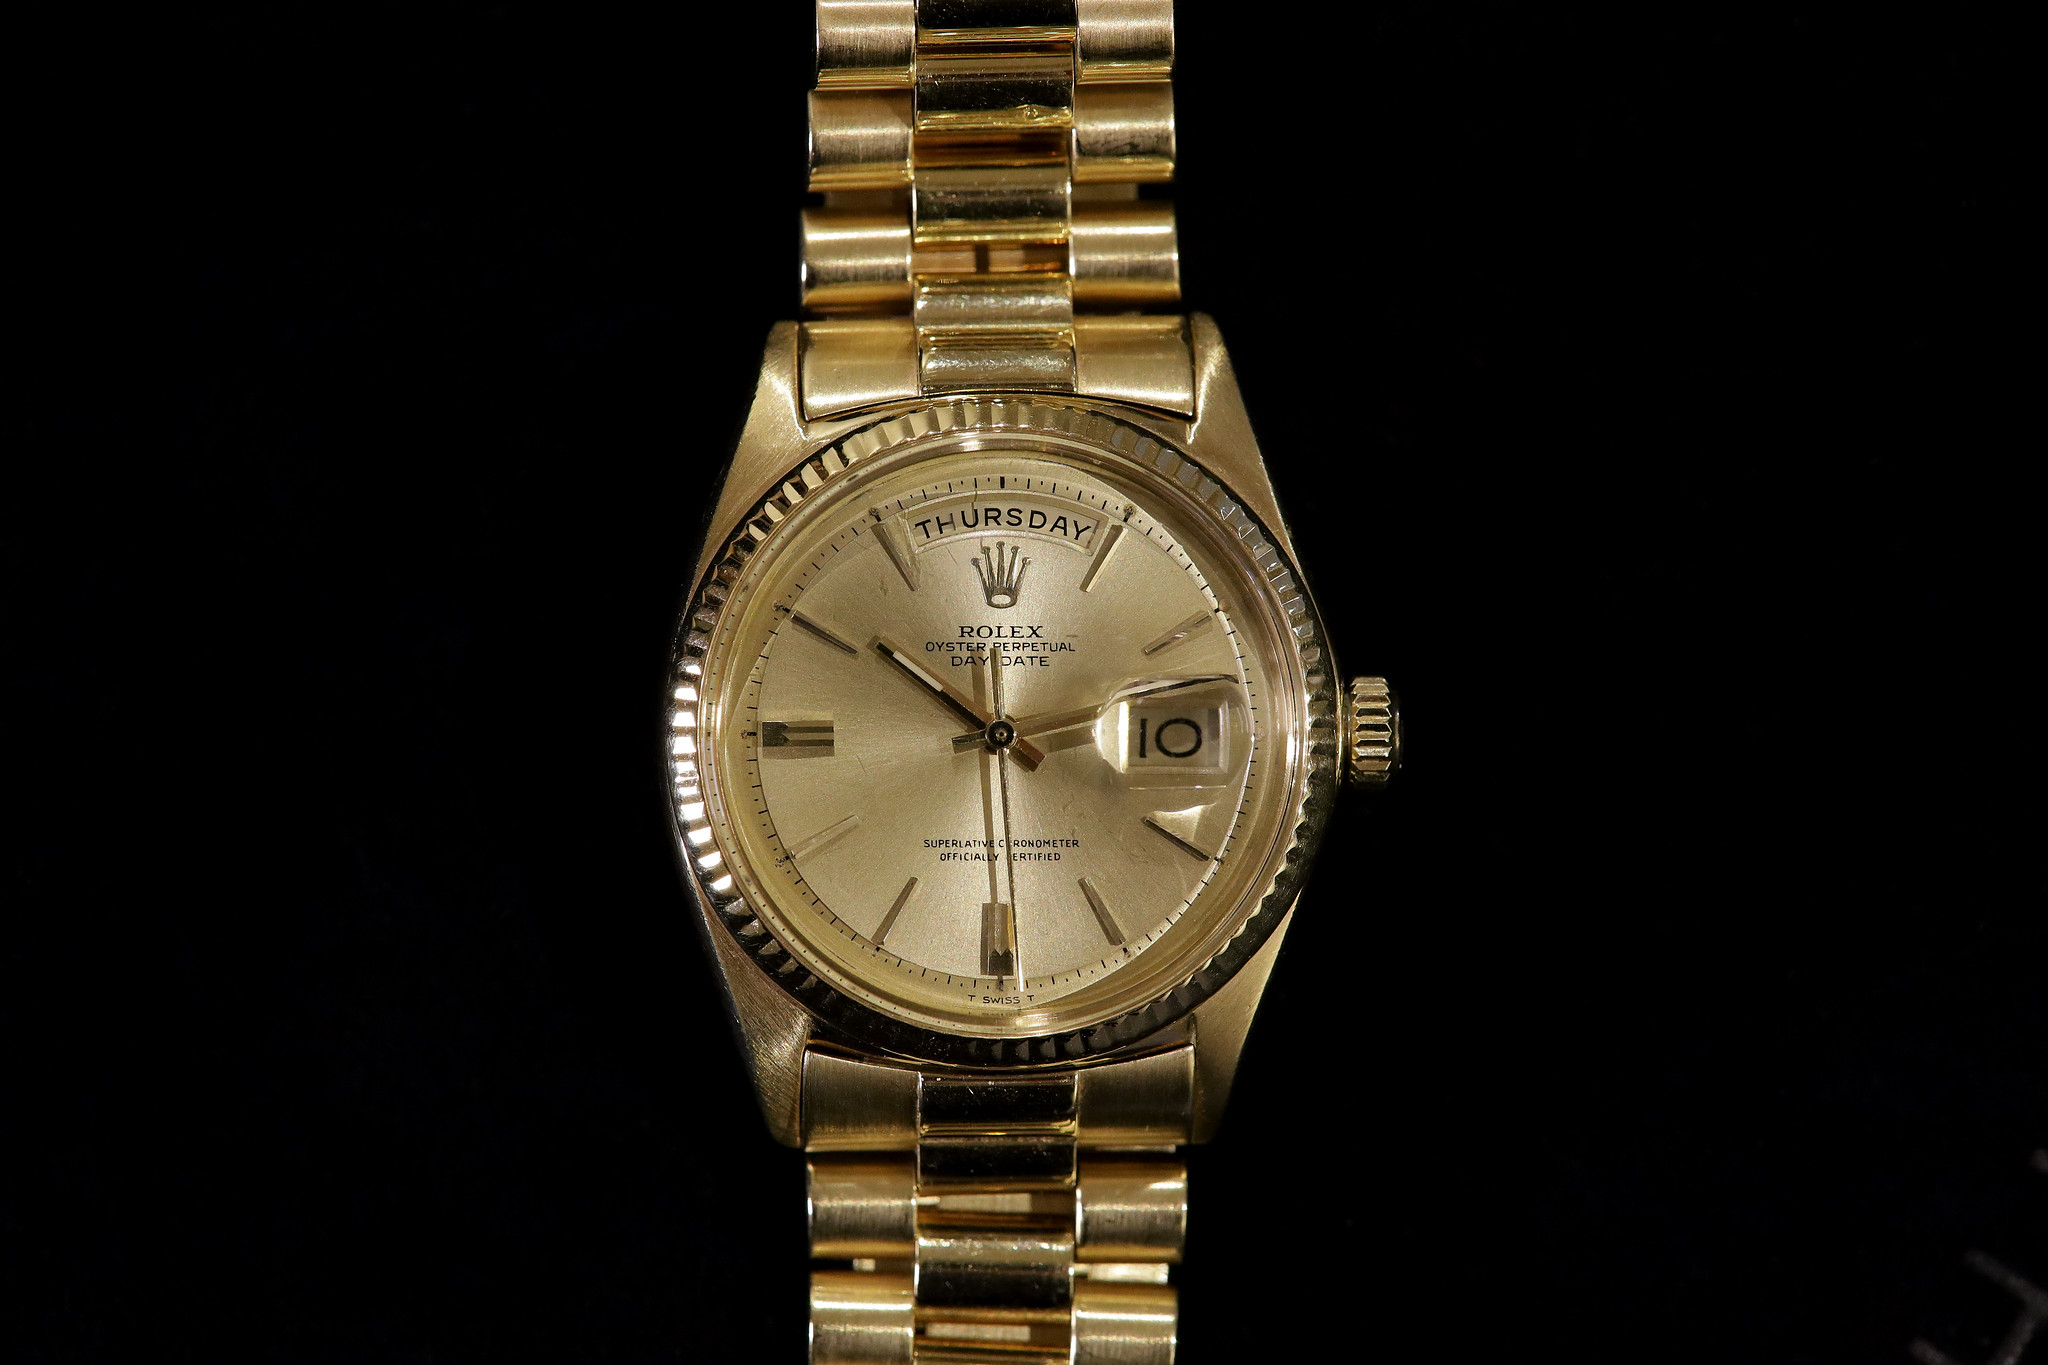 The Jack Nicklaus Yellow Gold Rolex Day 